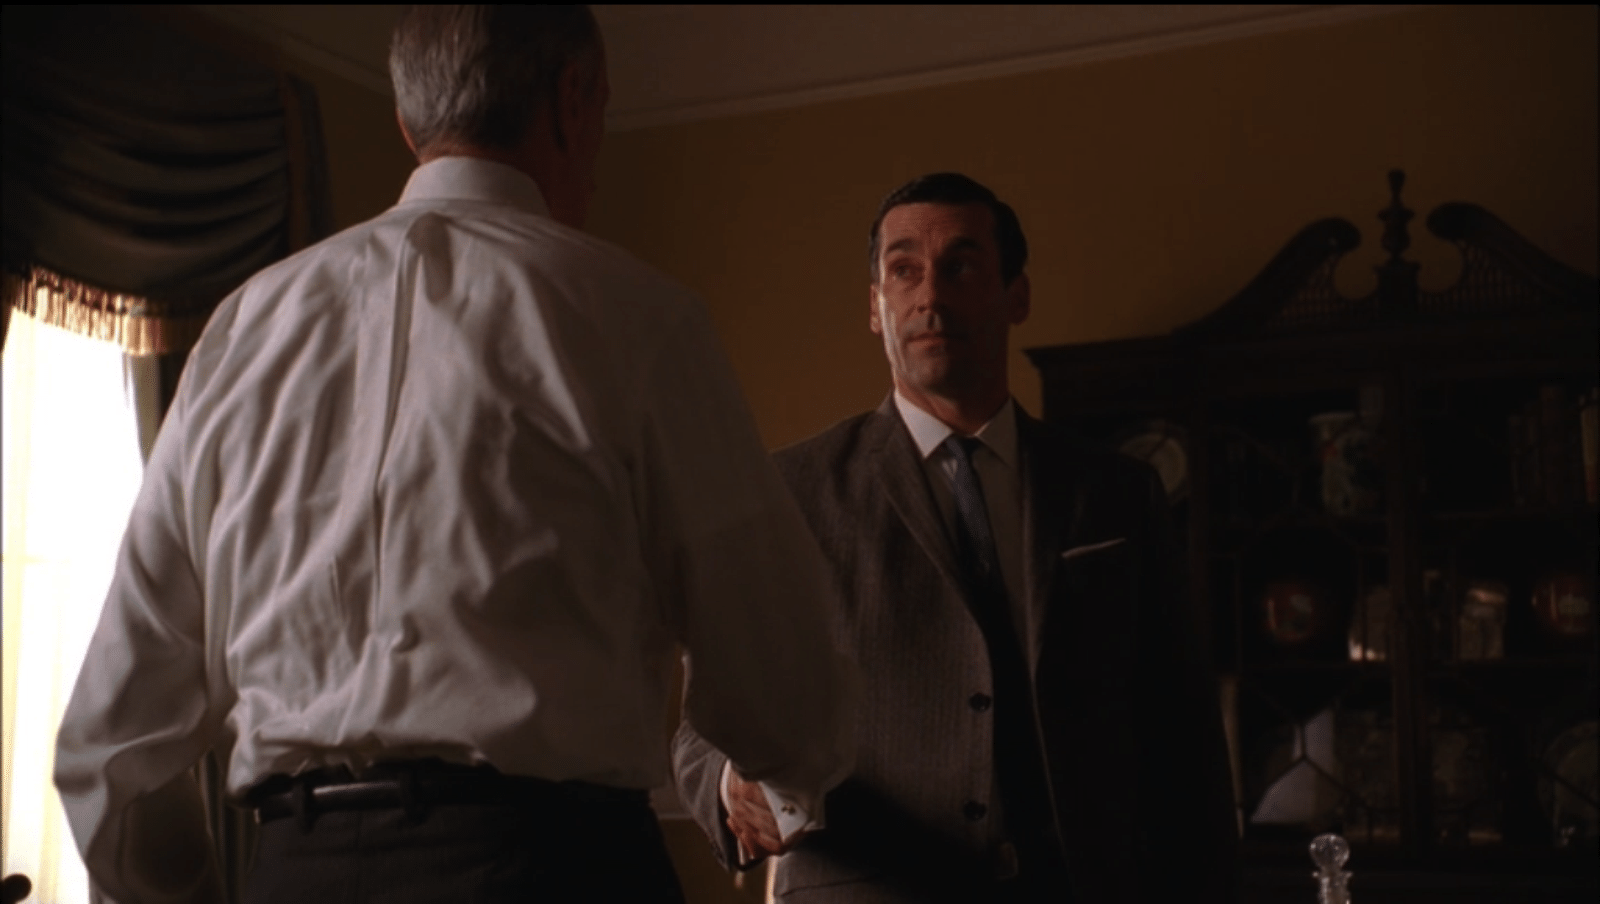 The Hilton story comes to a close as Conrad tells Don that Sterling Cooper is about to be sold and he's taking his business elsewhere.  "Some other time we'll try again," Conrad says before sending Don off.